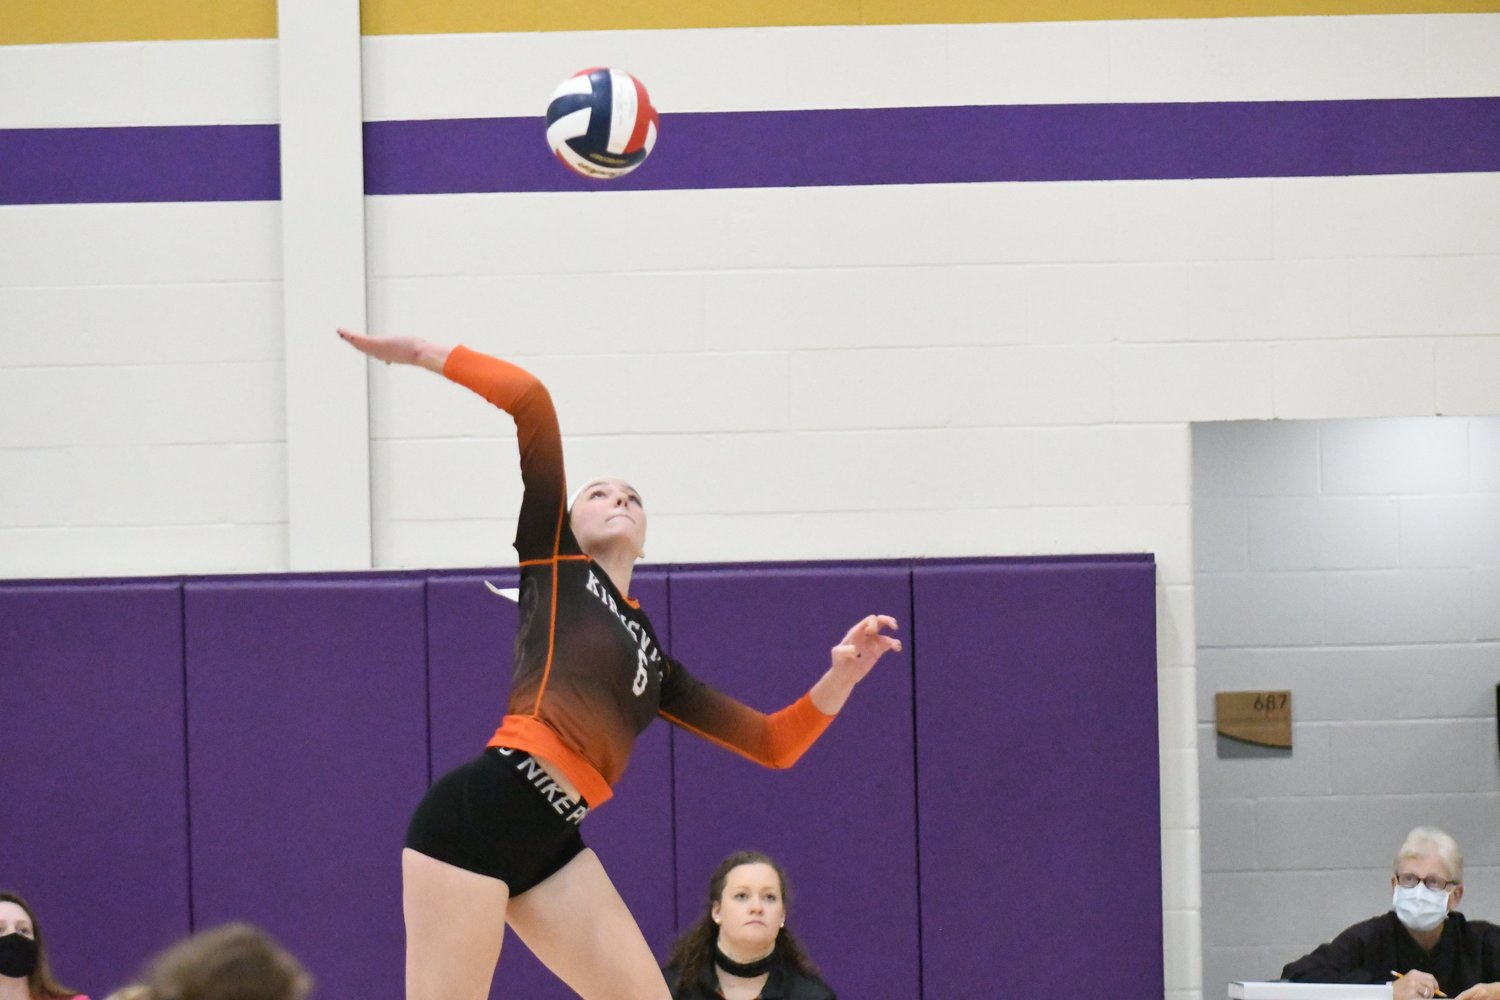 Action from Tuesday's Class 3 District 7 title game between Kirksville and Mexico